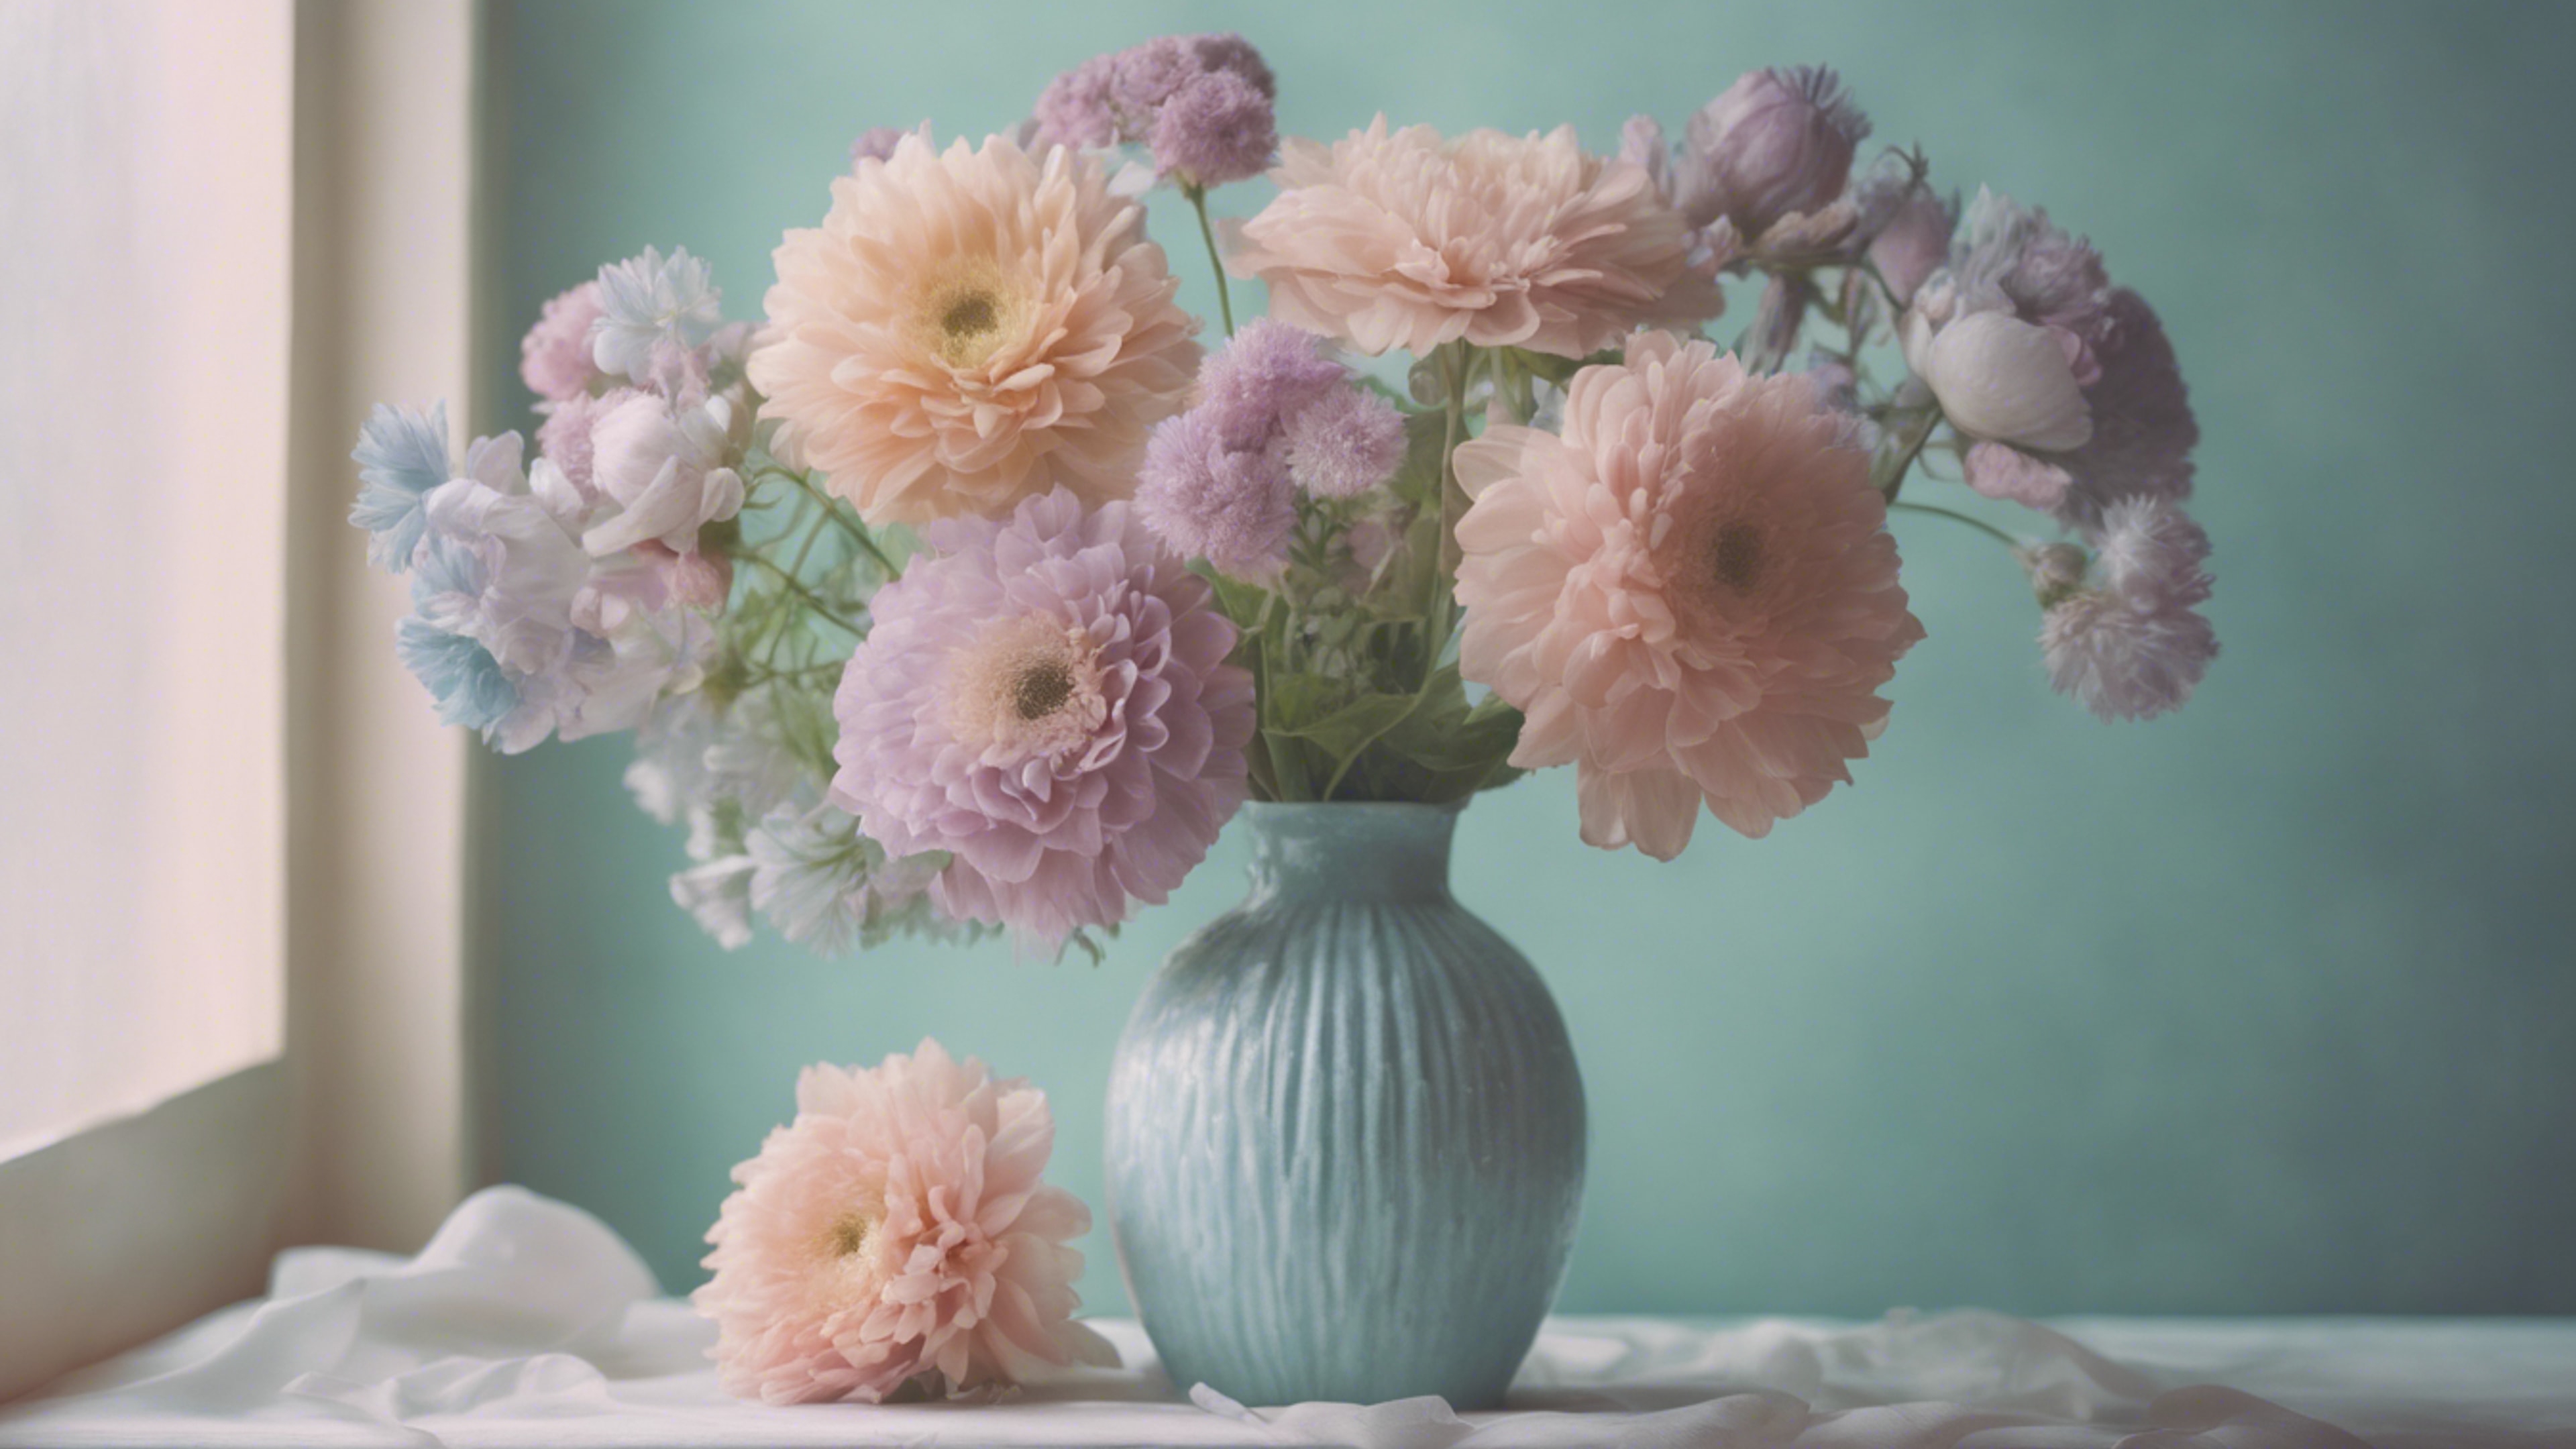 A pastel toned still-life painting featuring cool pastel colored flowers in a vase. Tapeet[6e1327f815a34bc2b32b]